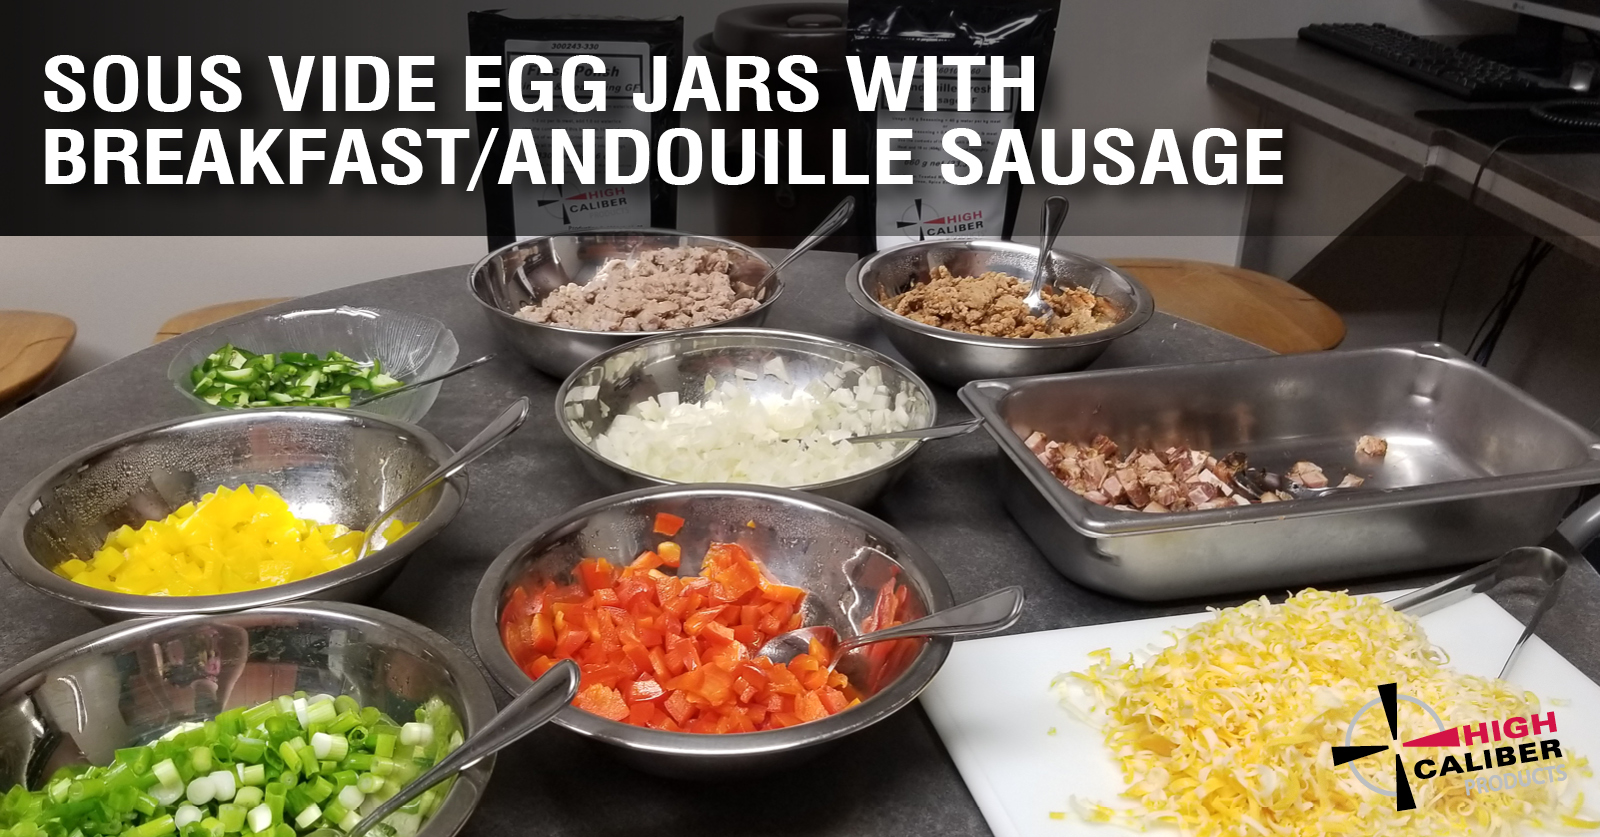 Egg Jars with Breakfast Andouille Sausage